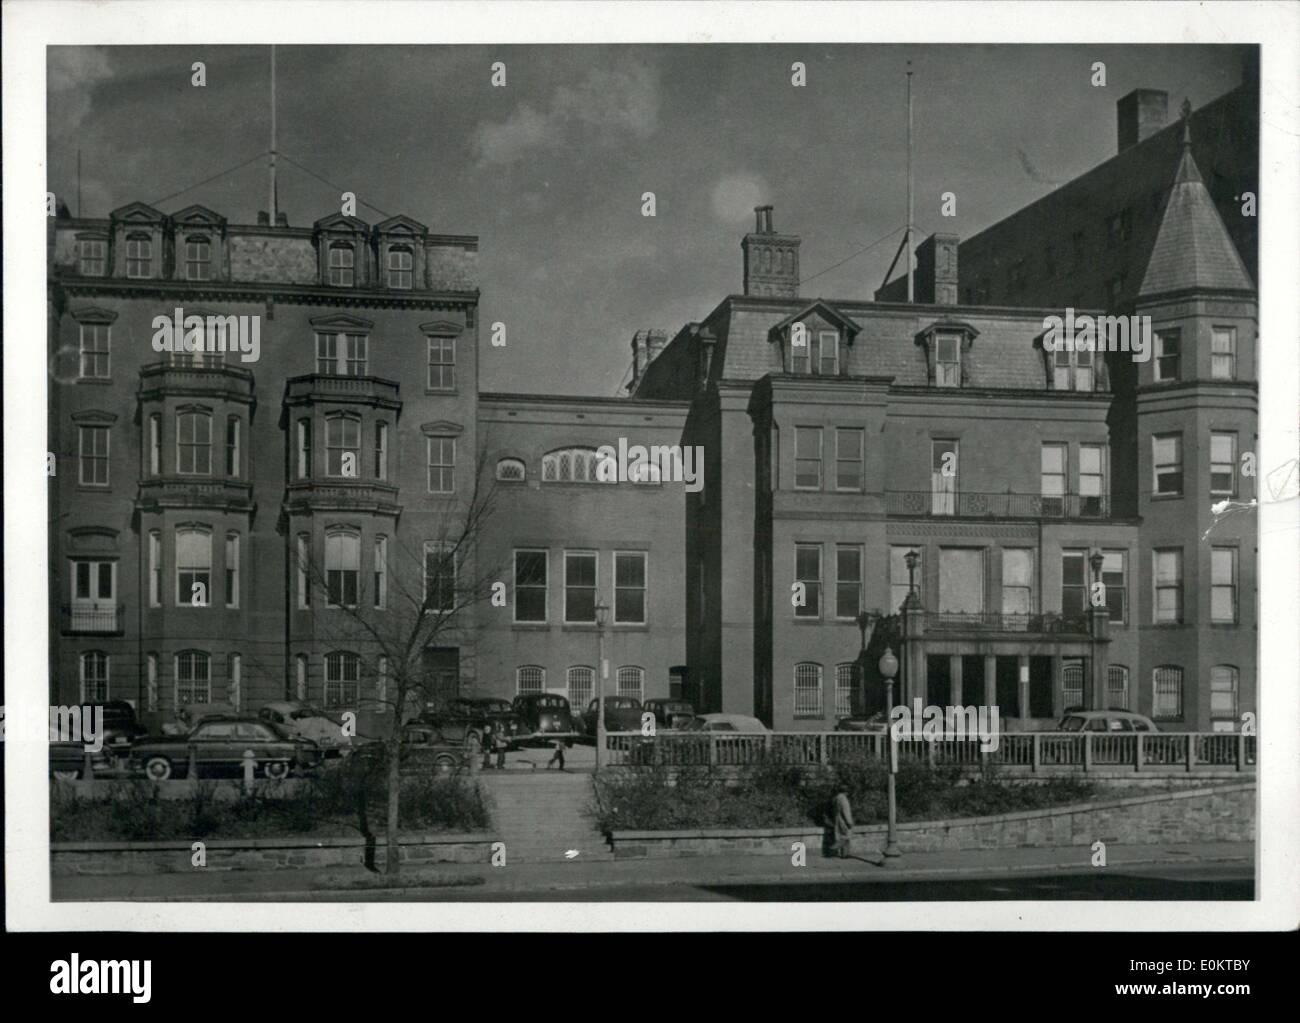 Jan. 30, 1951 - The building in Washington DC wher Germans were held Stock Photo